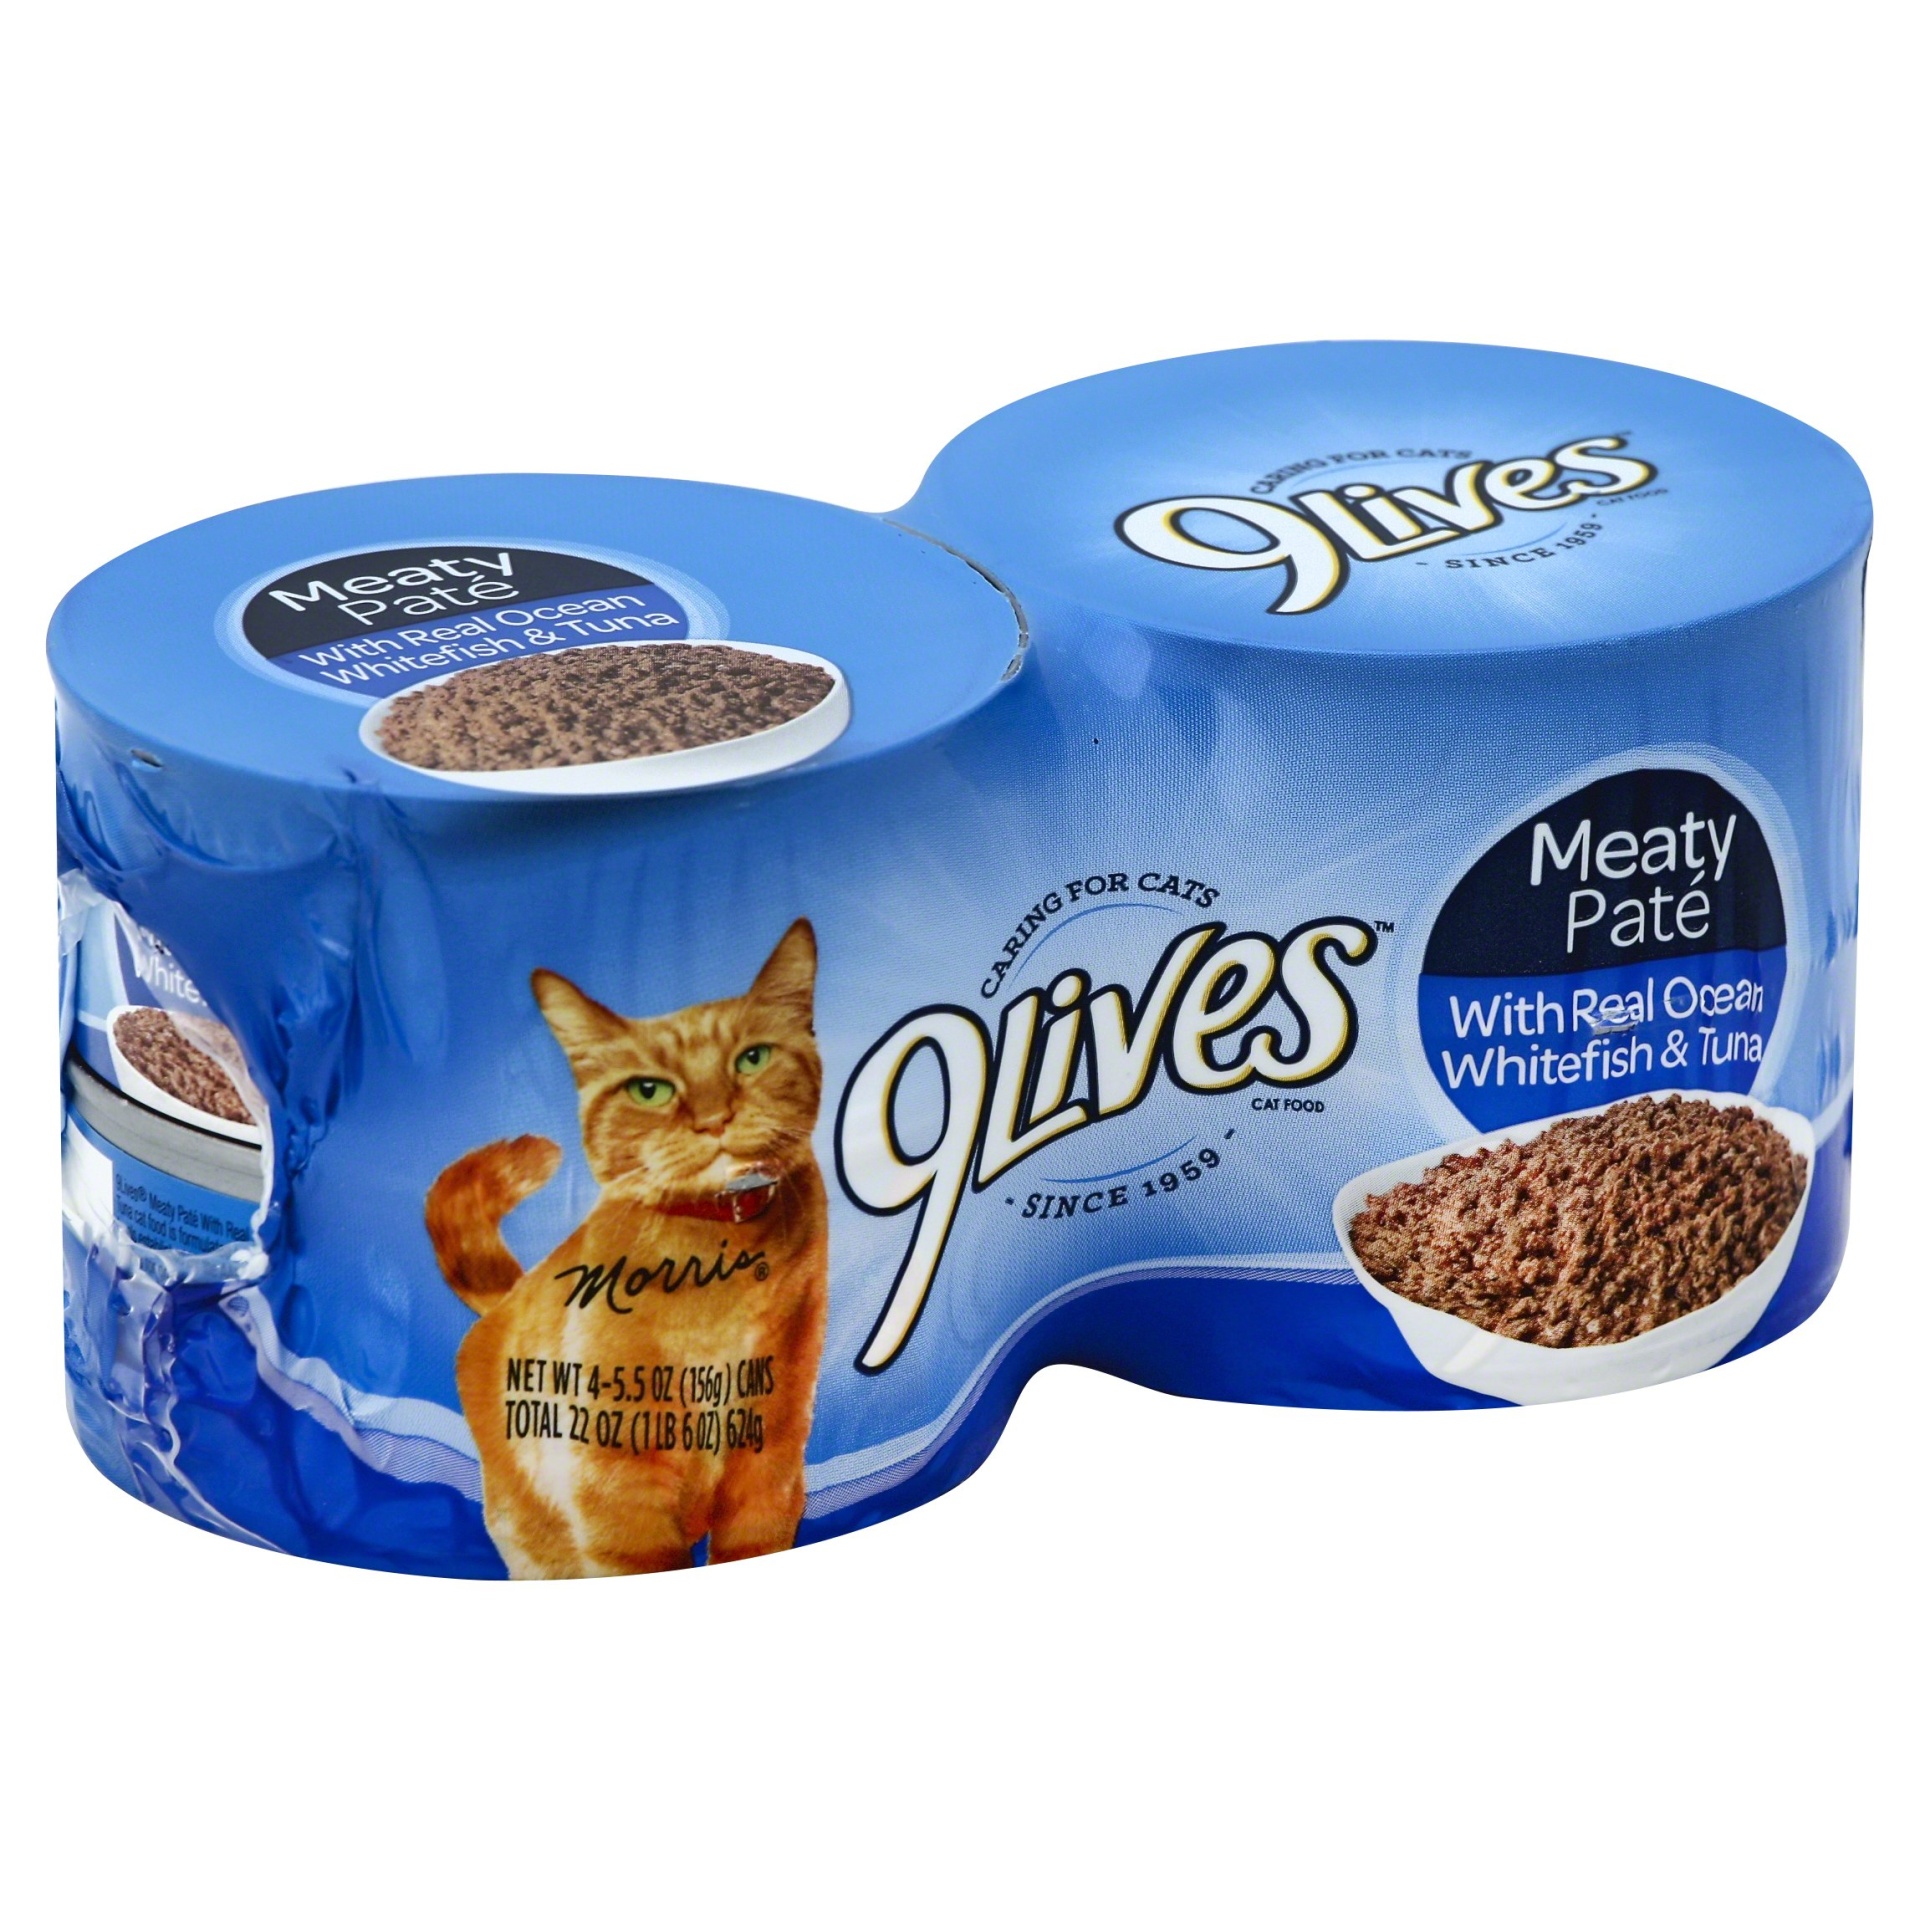 slide 1 of 6, 9Lives Cat Food with Real Ocean Whitefish & Tuna Meaty Pate, 4 ct; 22 oz